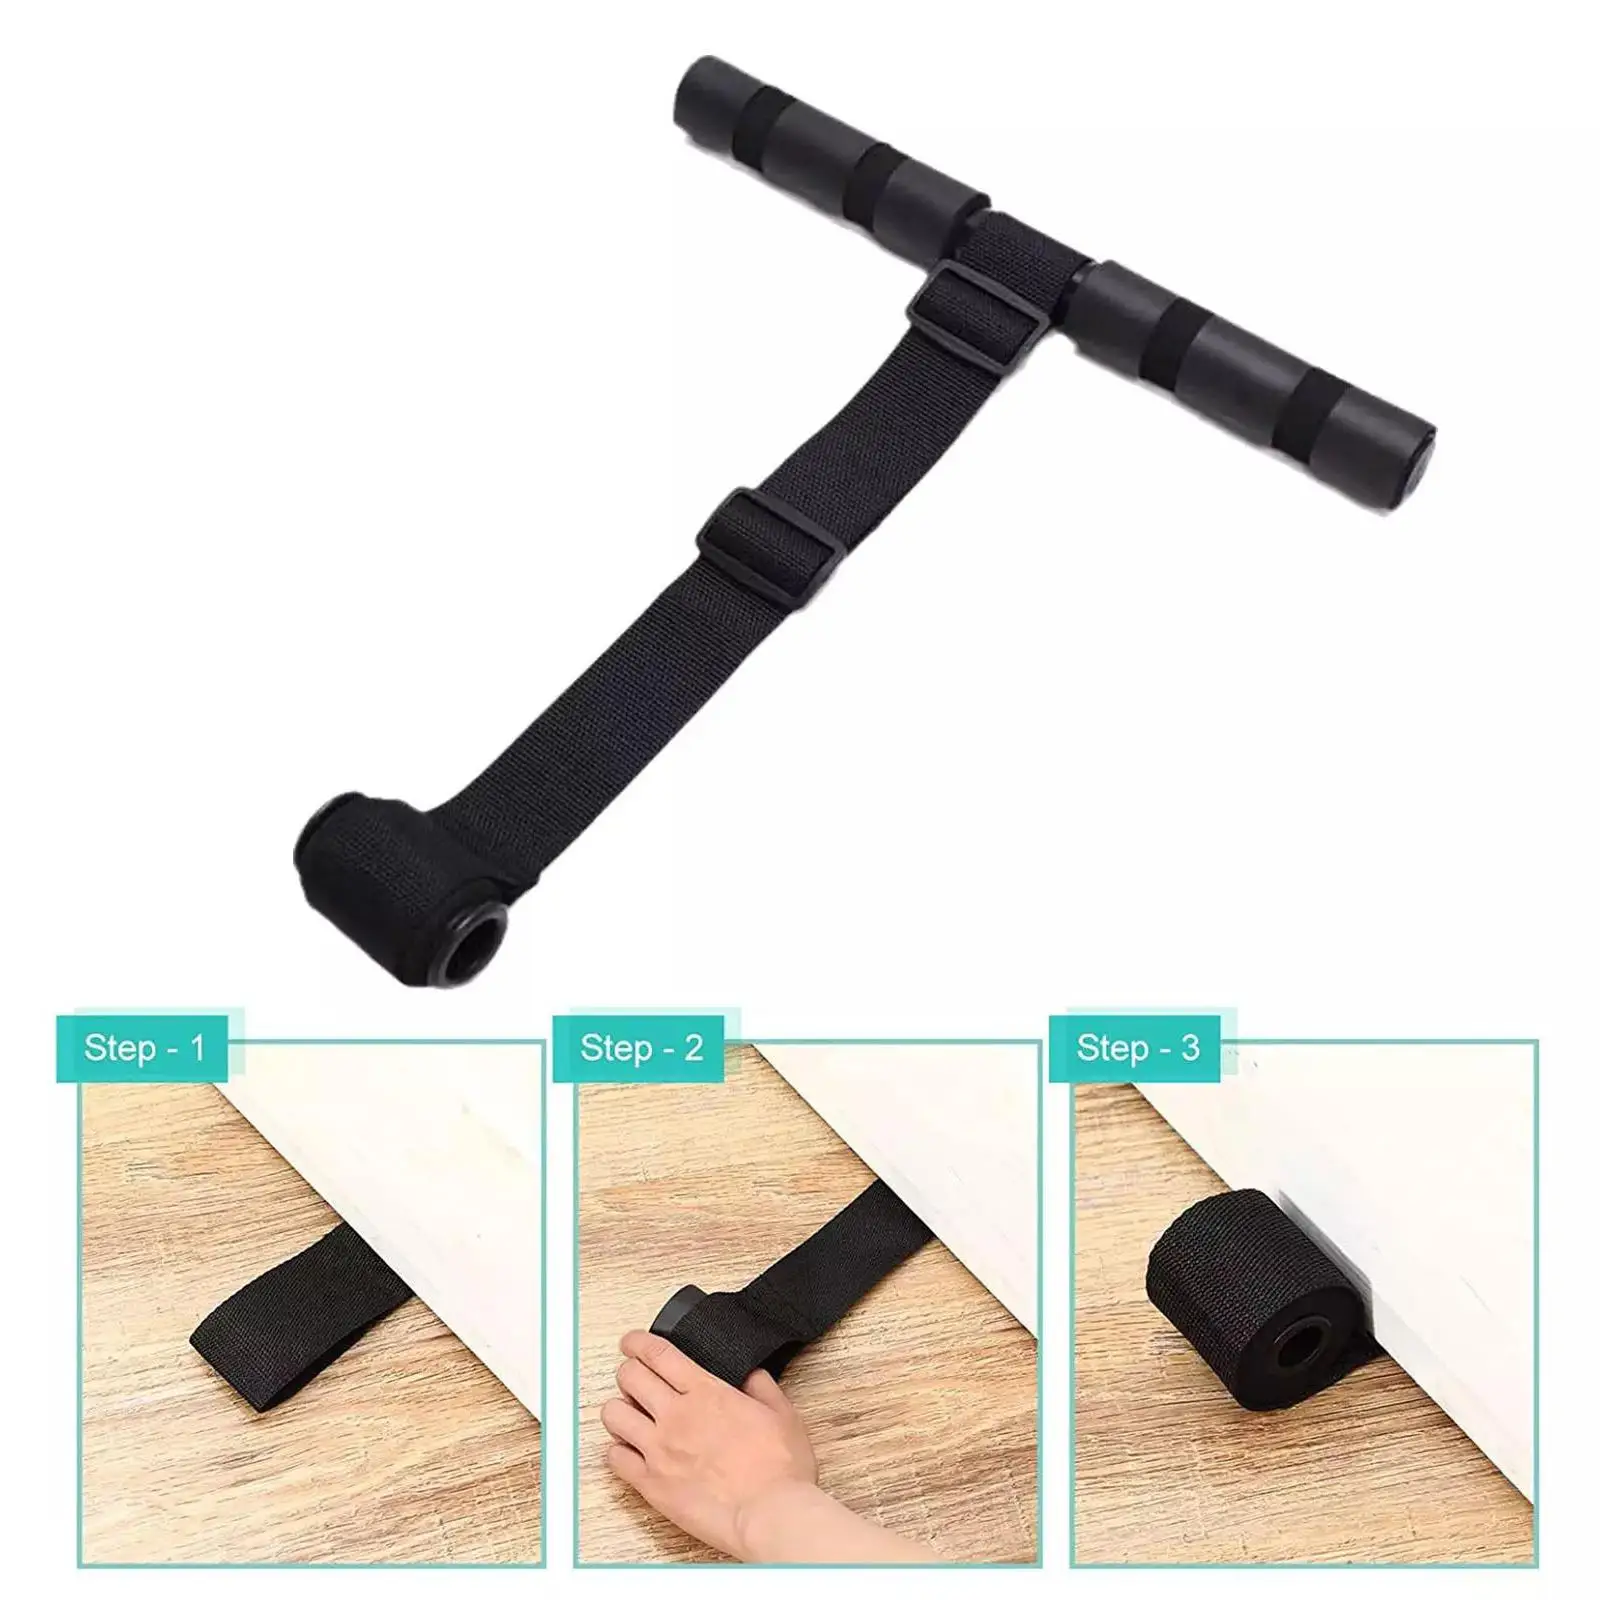 Nordic Hamstring Curl Strap Body Stretching Abdominal Exercise Sit up for Bodybuilding Abdominal Fitness Strength Home Travel